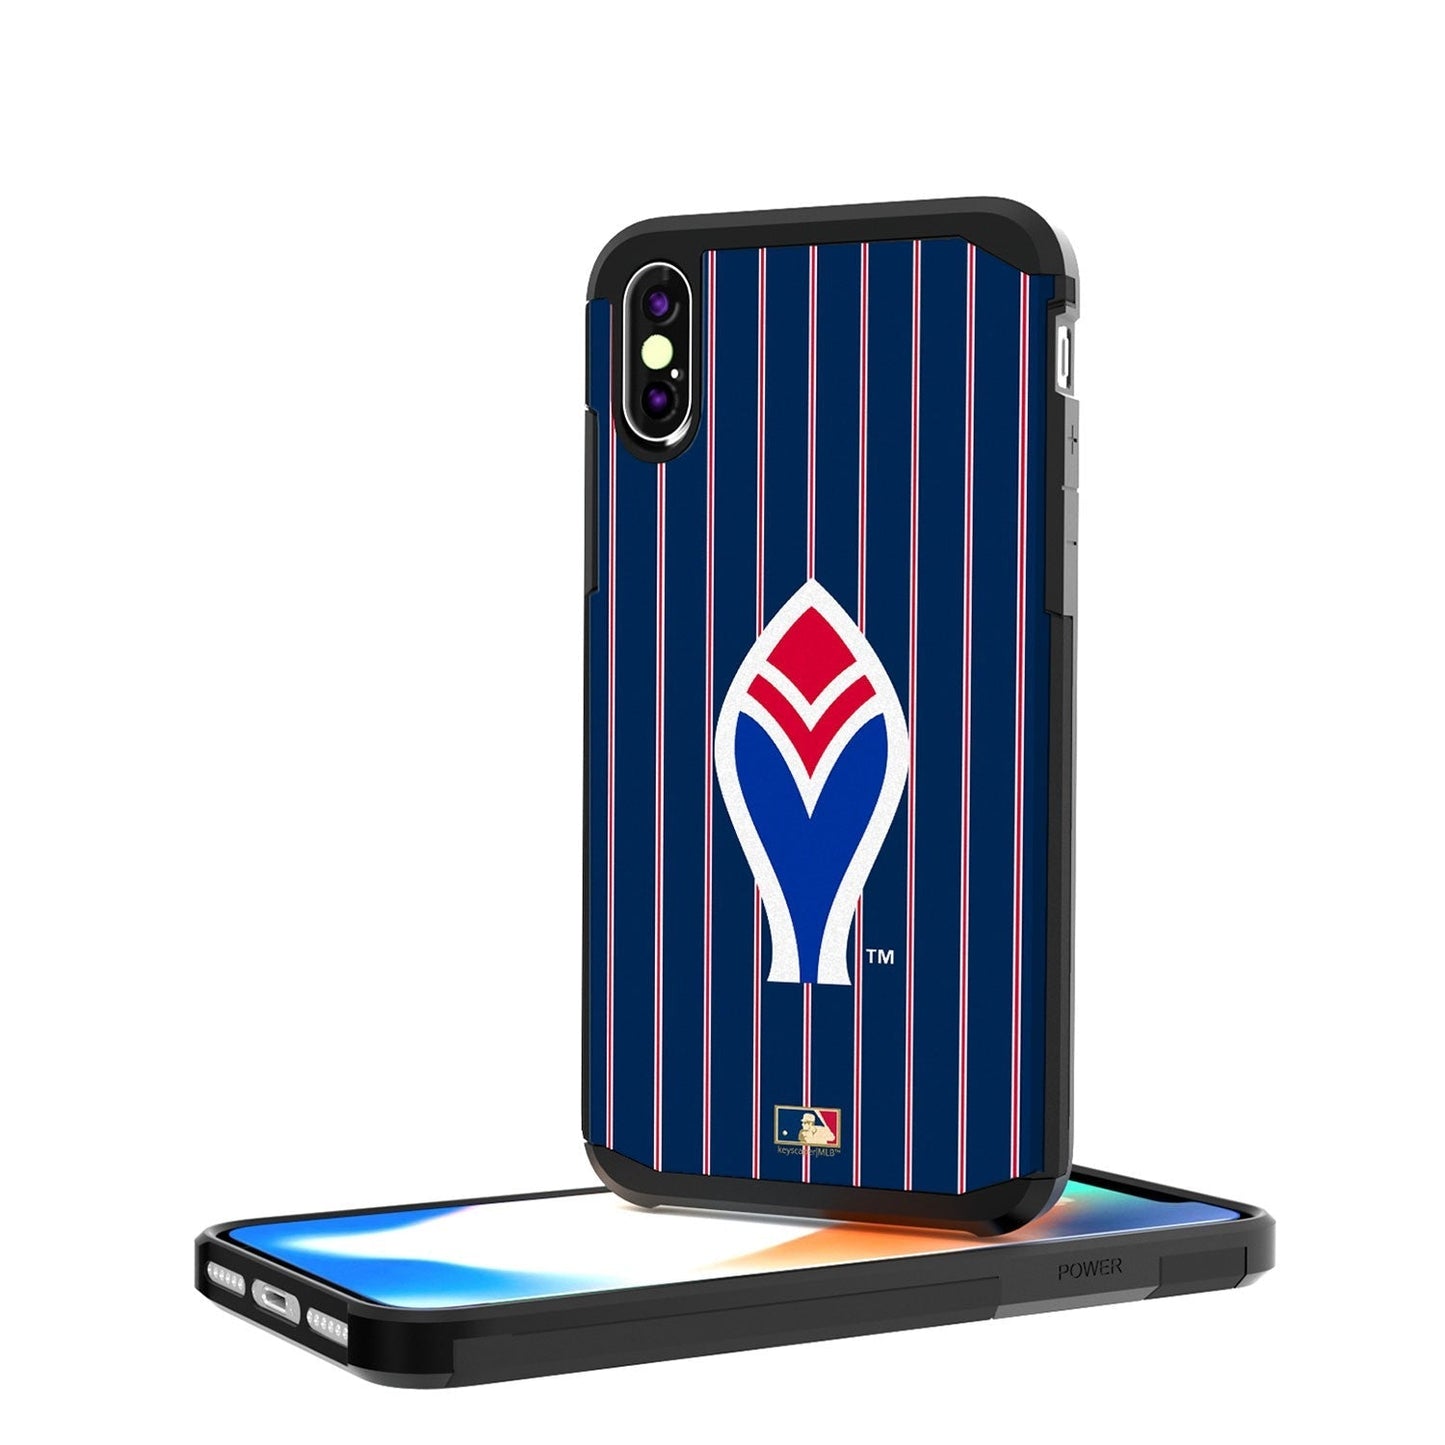 Atlanta Braves 1972-1975 - Cooperstown Collection Pinstripe Rugged Case